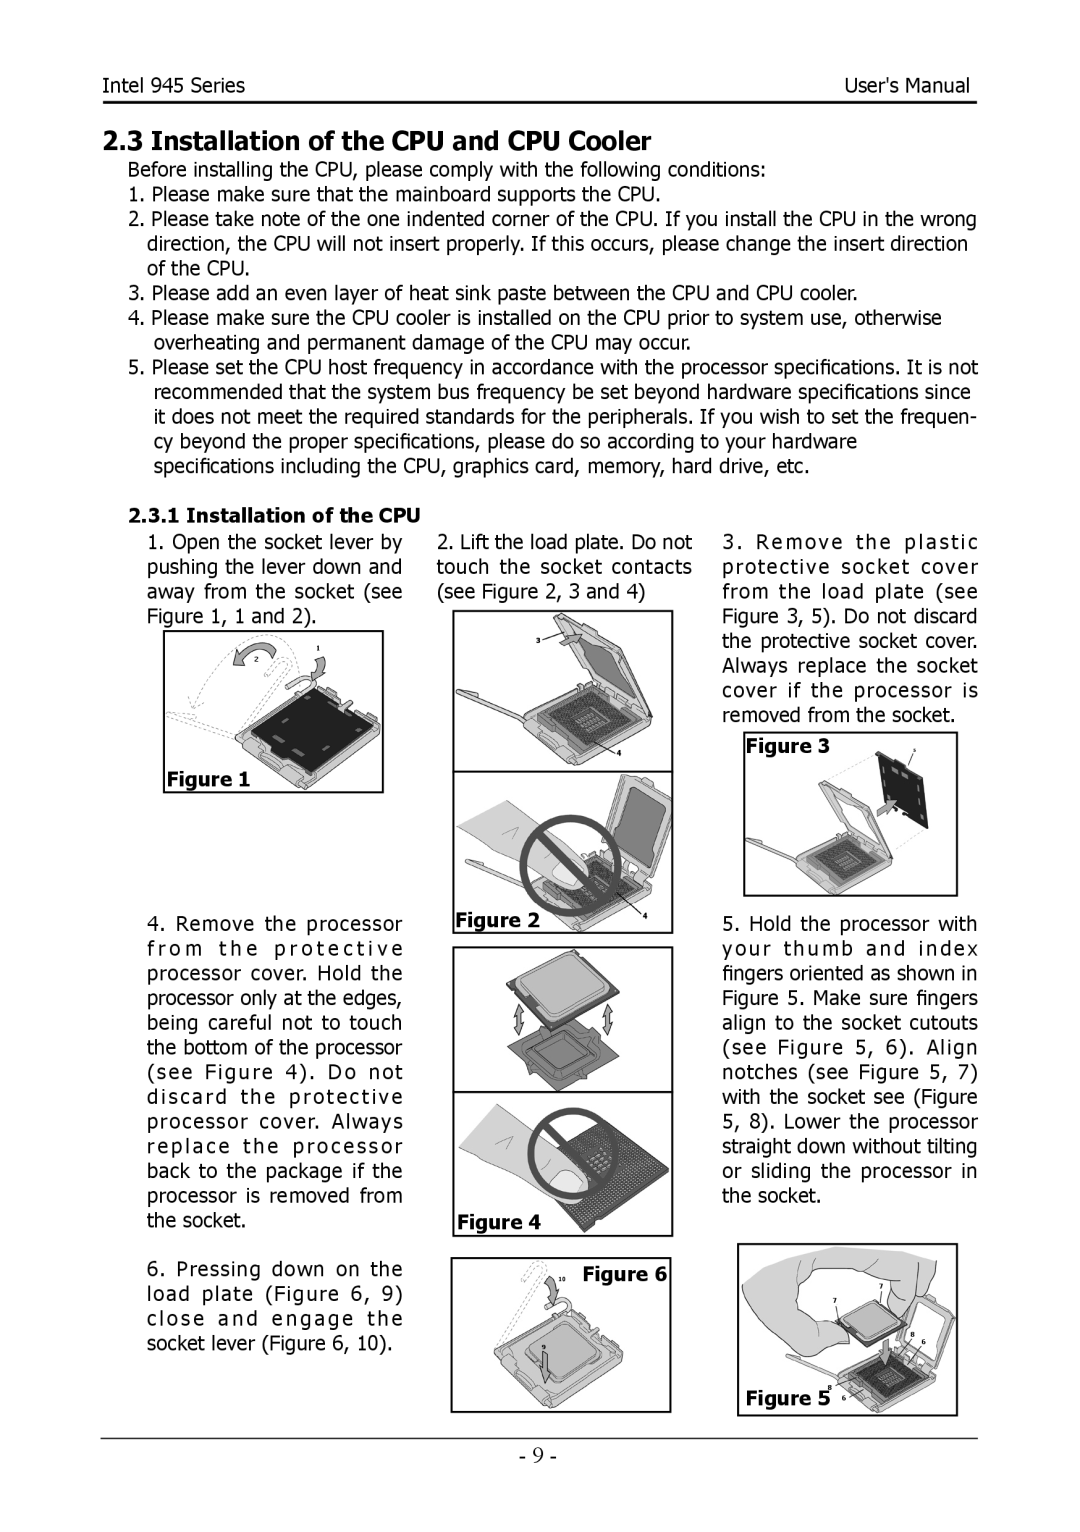 Intel 945GZT, 945GCT user manual Installation of the CPU and CPU Cooler 